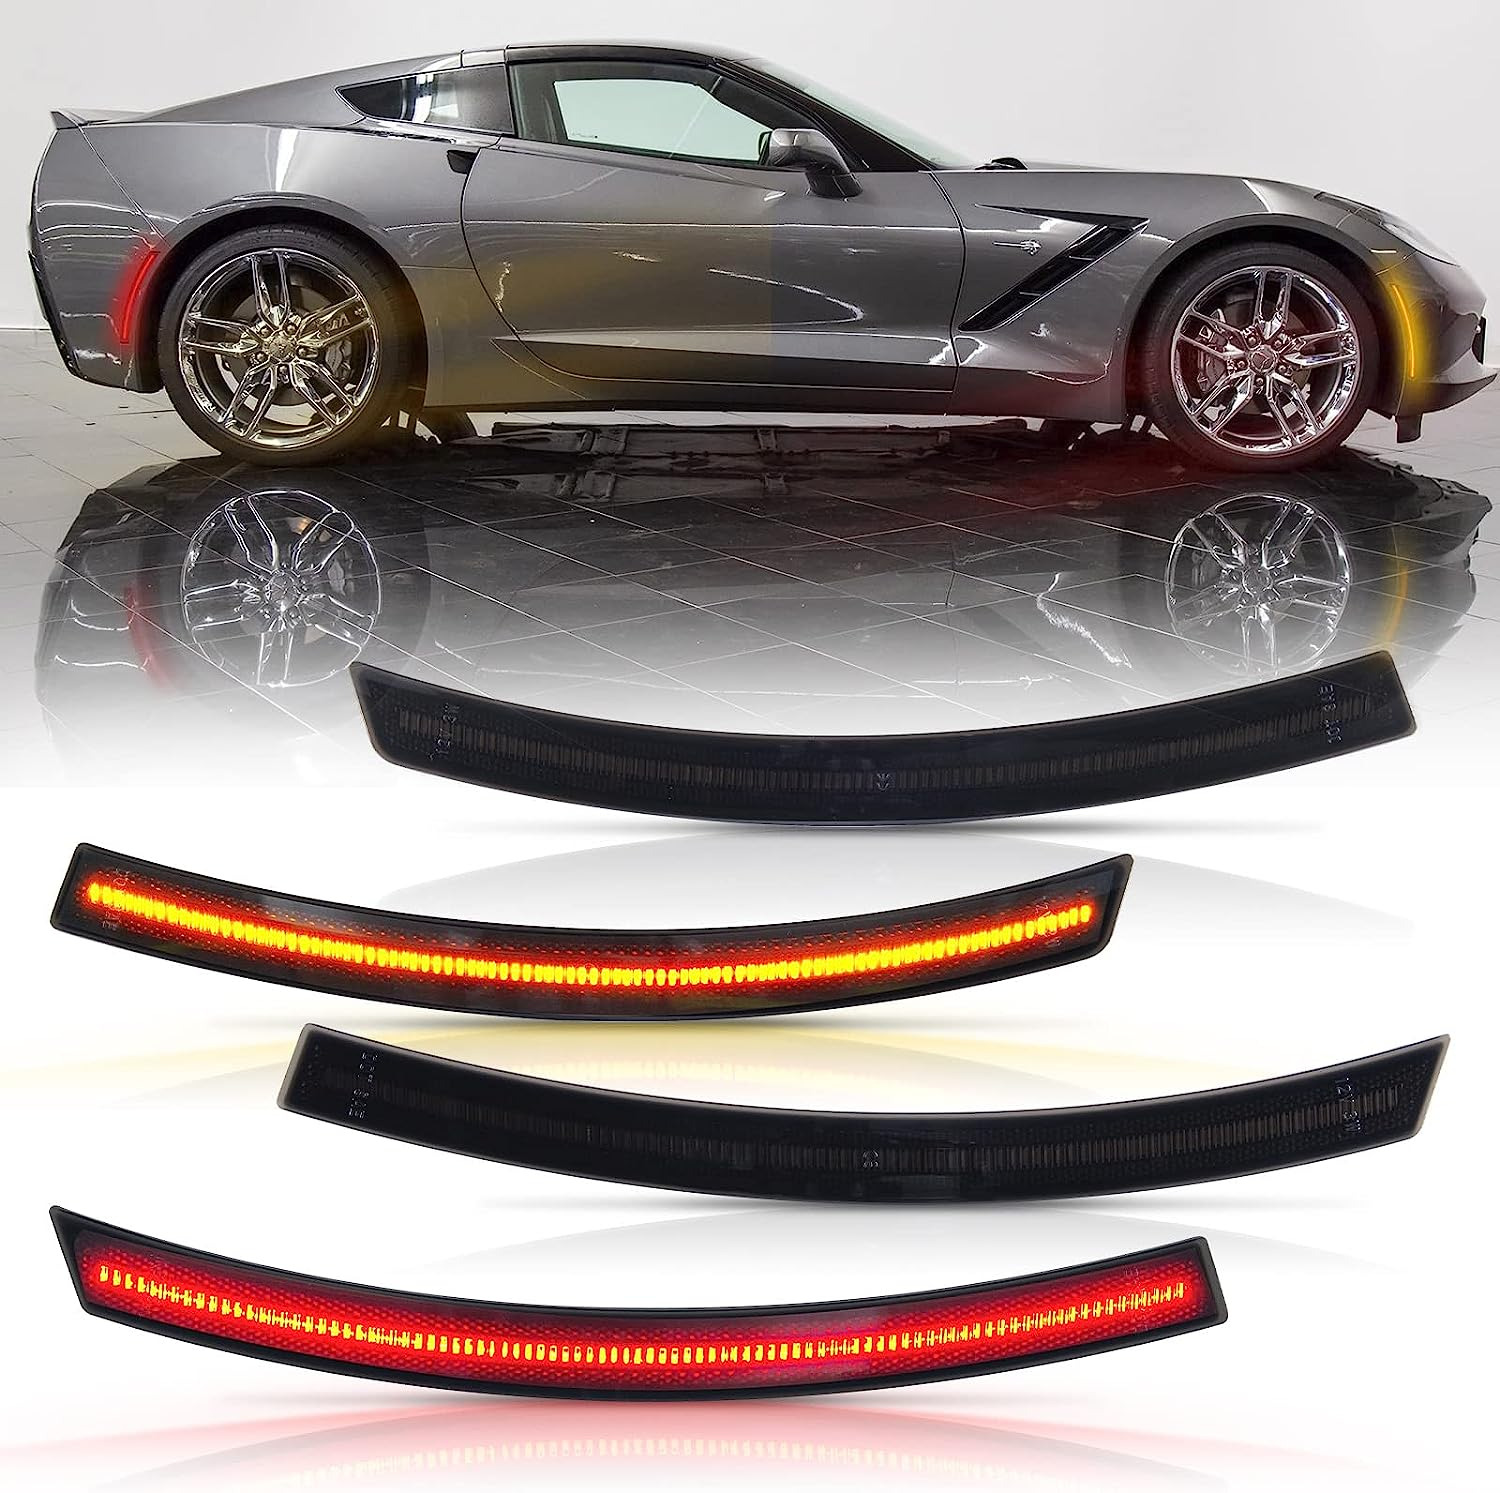 LED Side Marker Lights Kits Front Amber Rear Red Turn Signal Reflector Lamp for 